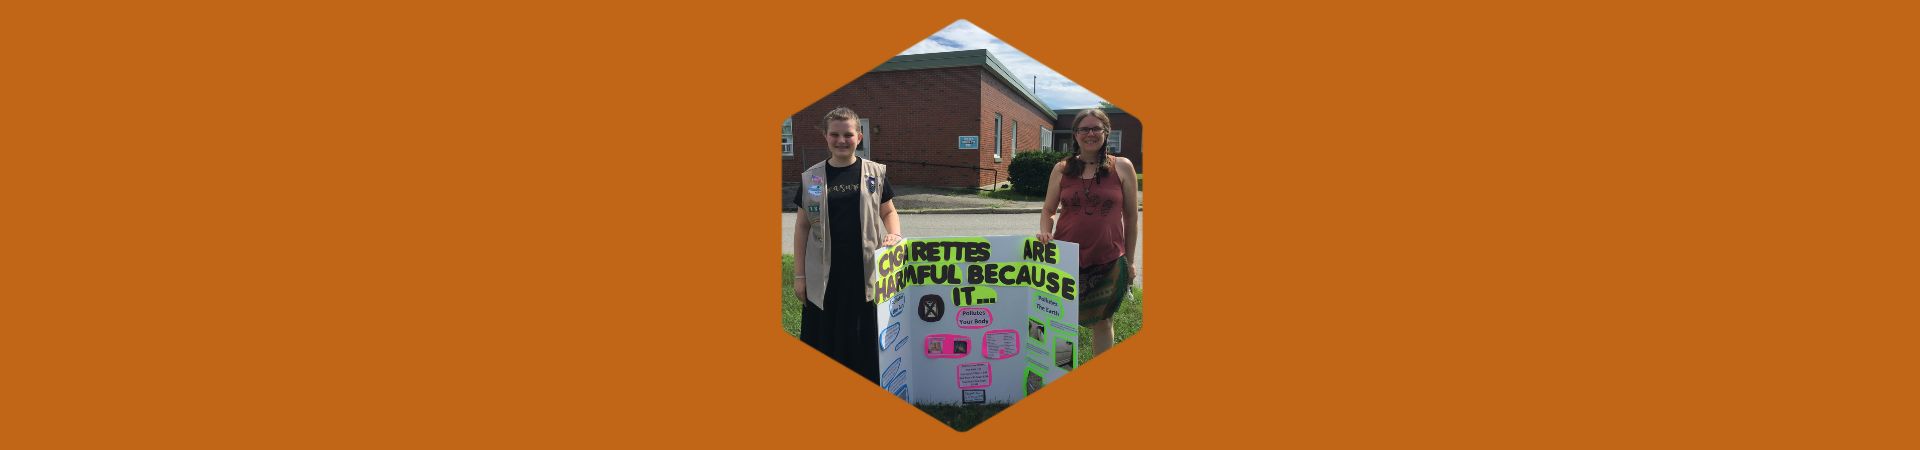  Two girls from troop 1340 standing on either side of a sign that explains why cigarettes are harmful 